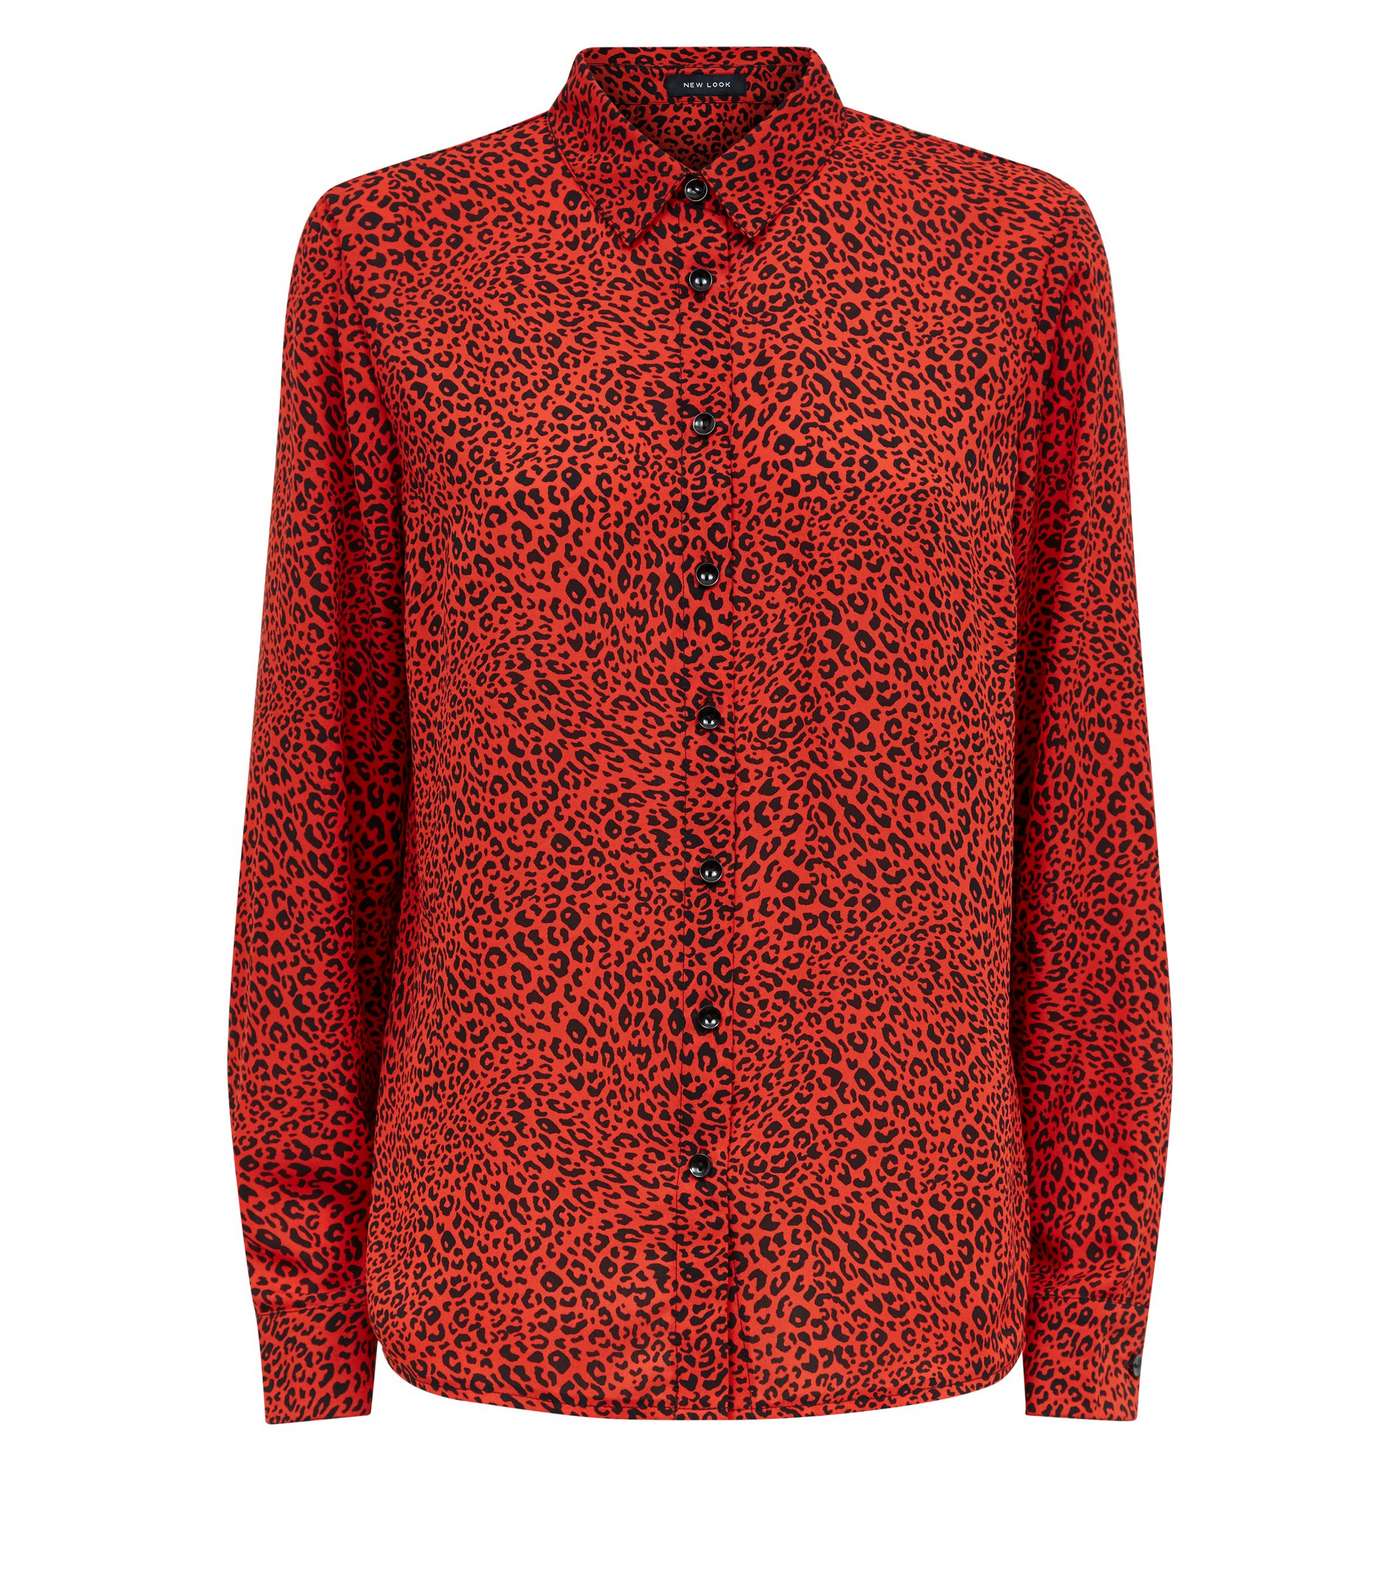 Red Leopard Print Long Sleeve Shirt Image 4